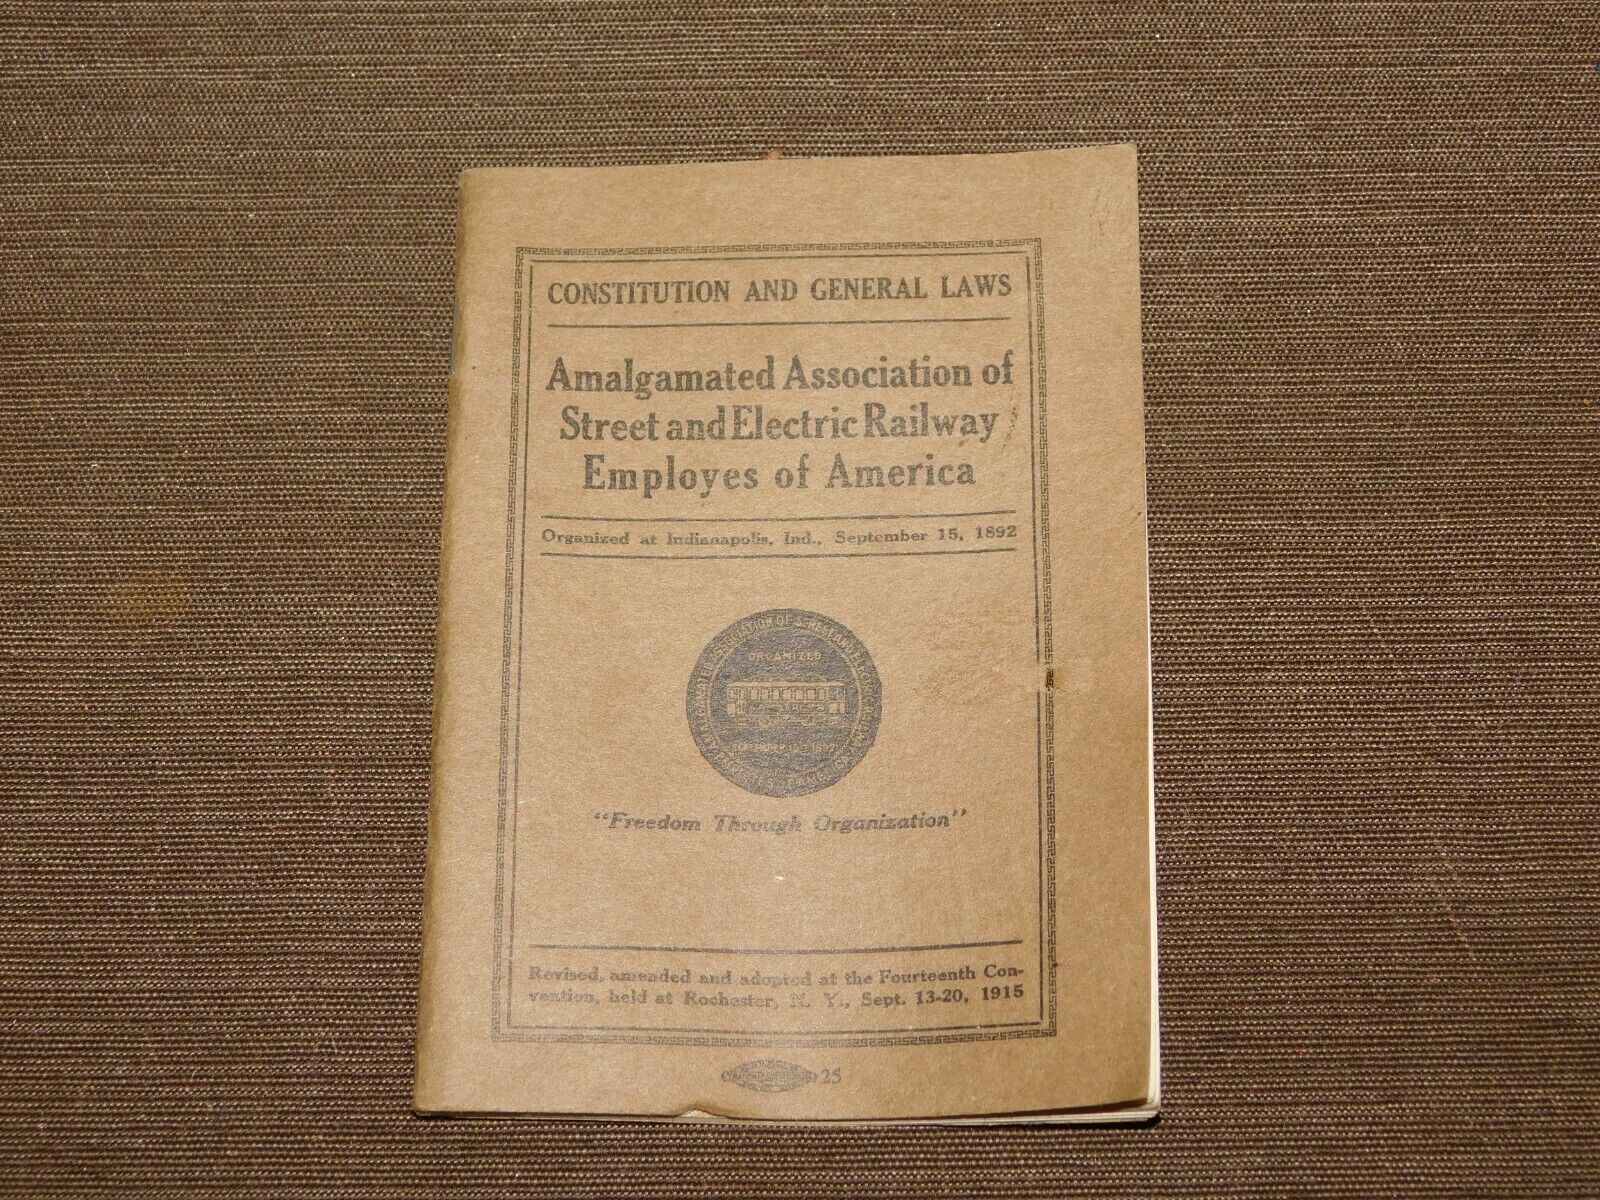 VINTAGE RAILROAD 1915 STREET & ELECTRIC RAILWAY EMPLOYES  CONSTITUTION BOOK